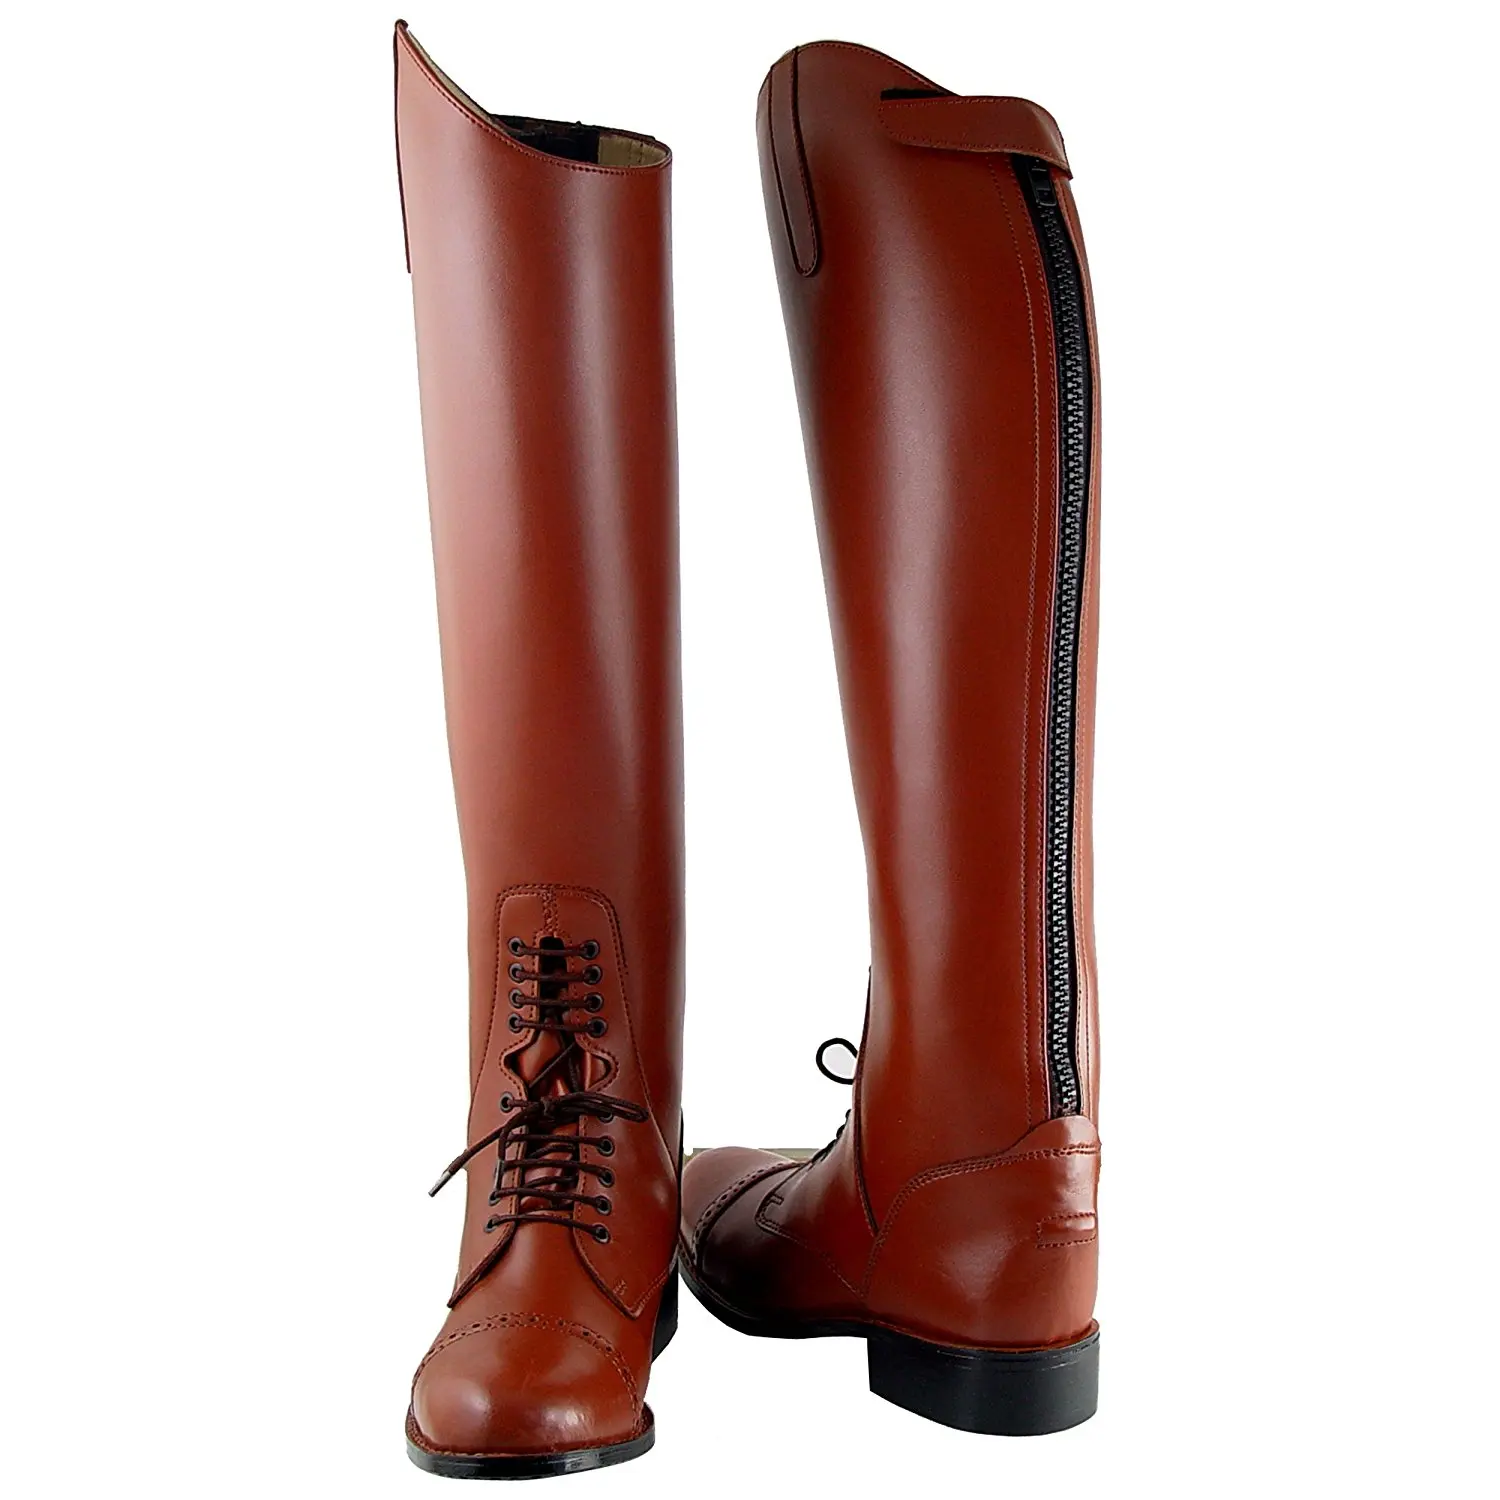 Cheap Tan Riding Boots, find Tan Riding Boots deals on line at Alibaba.com